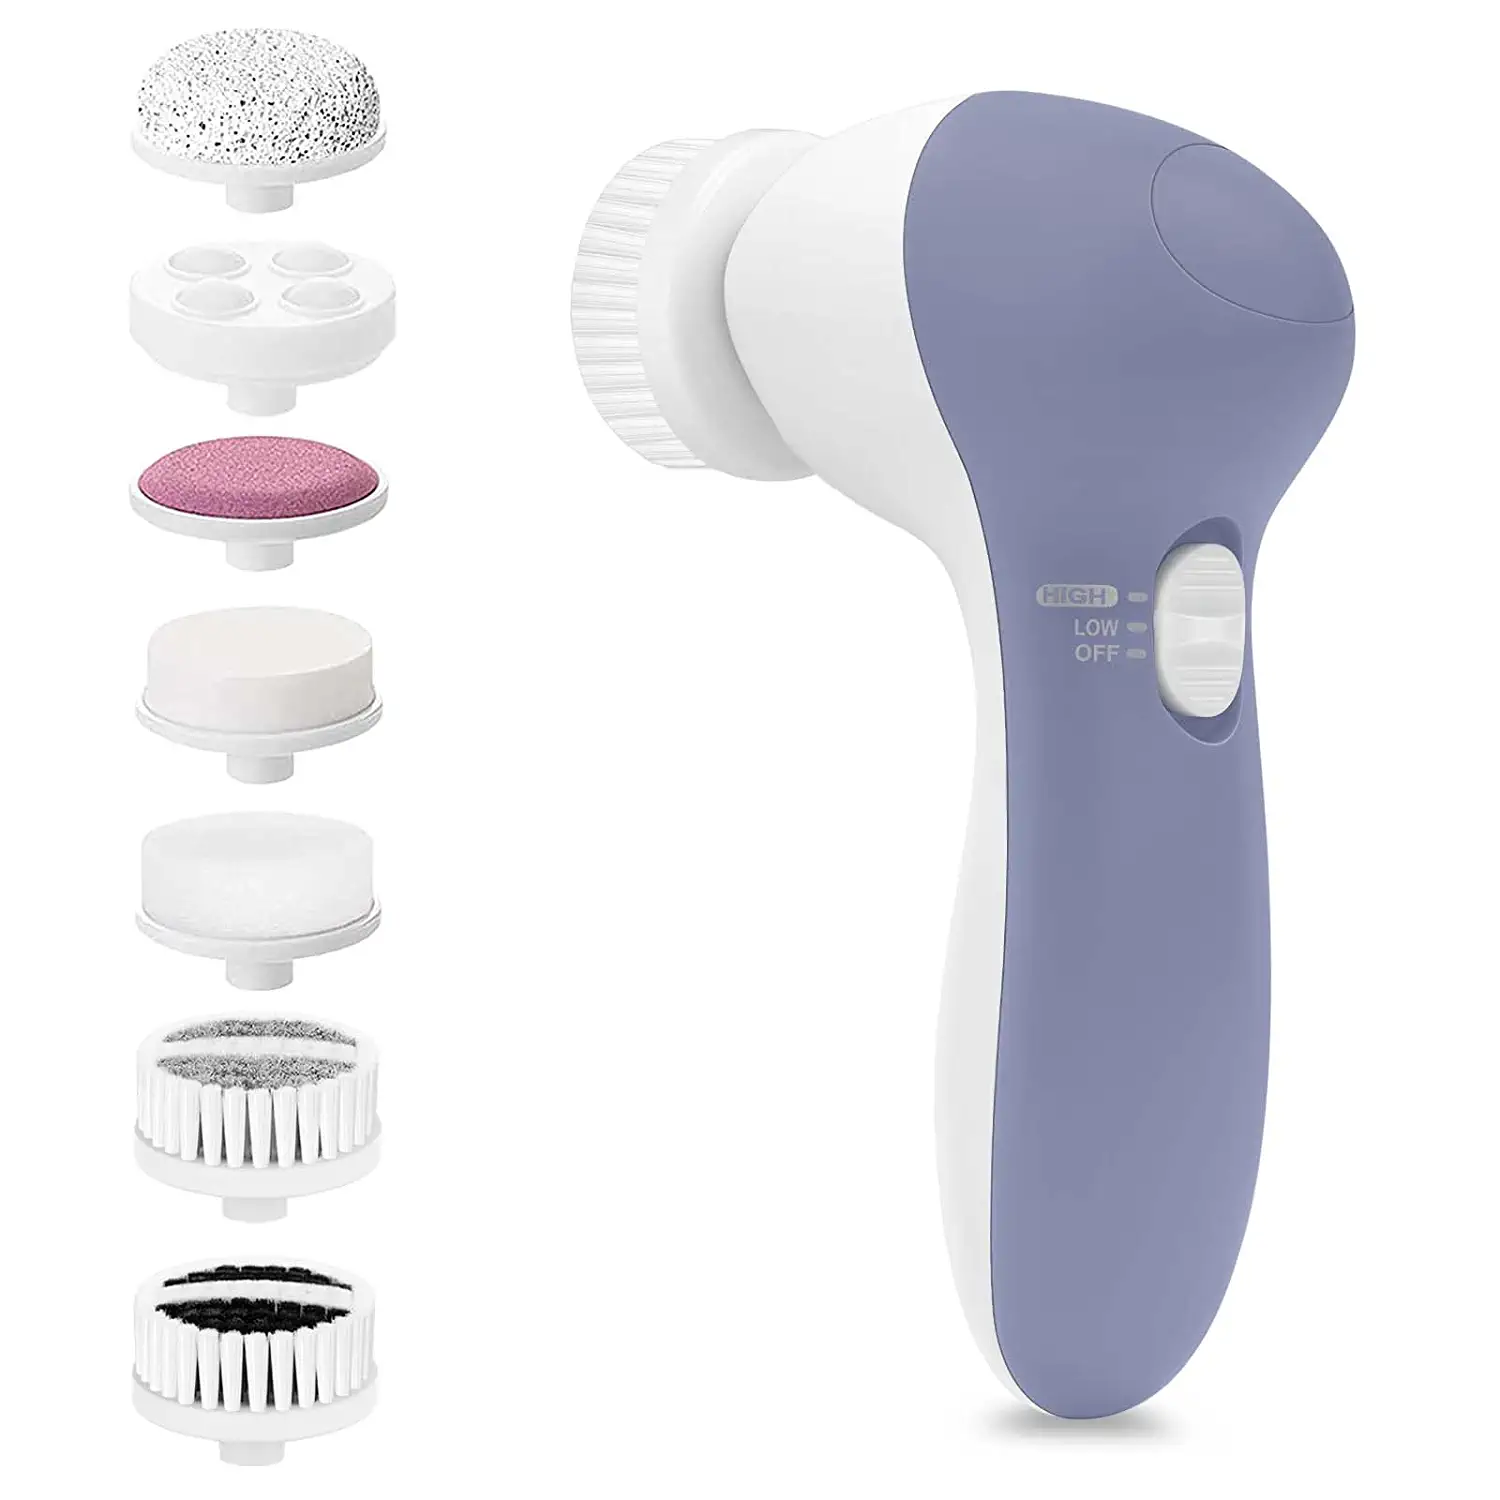 CLSEVXY 2 Rotation Speeds Facial Cleansing Brush